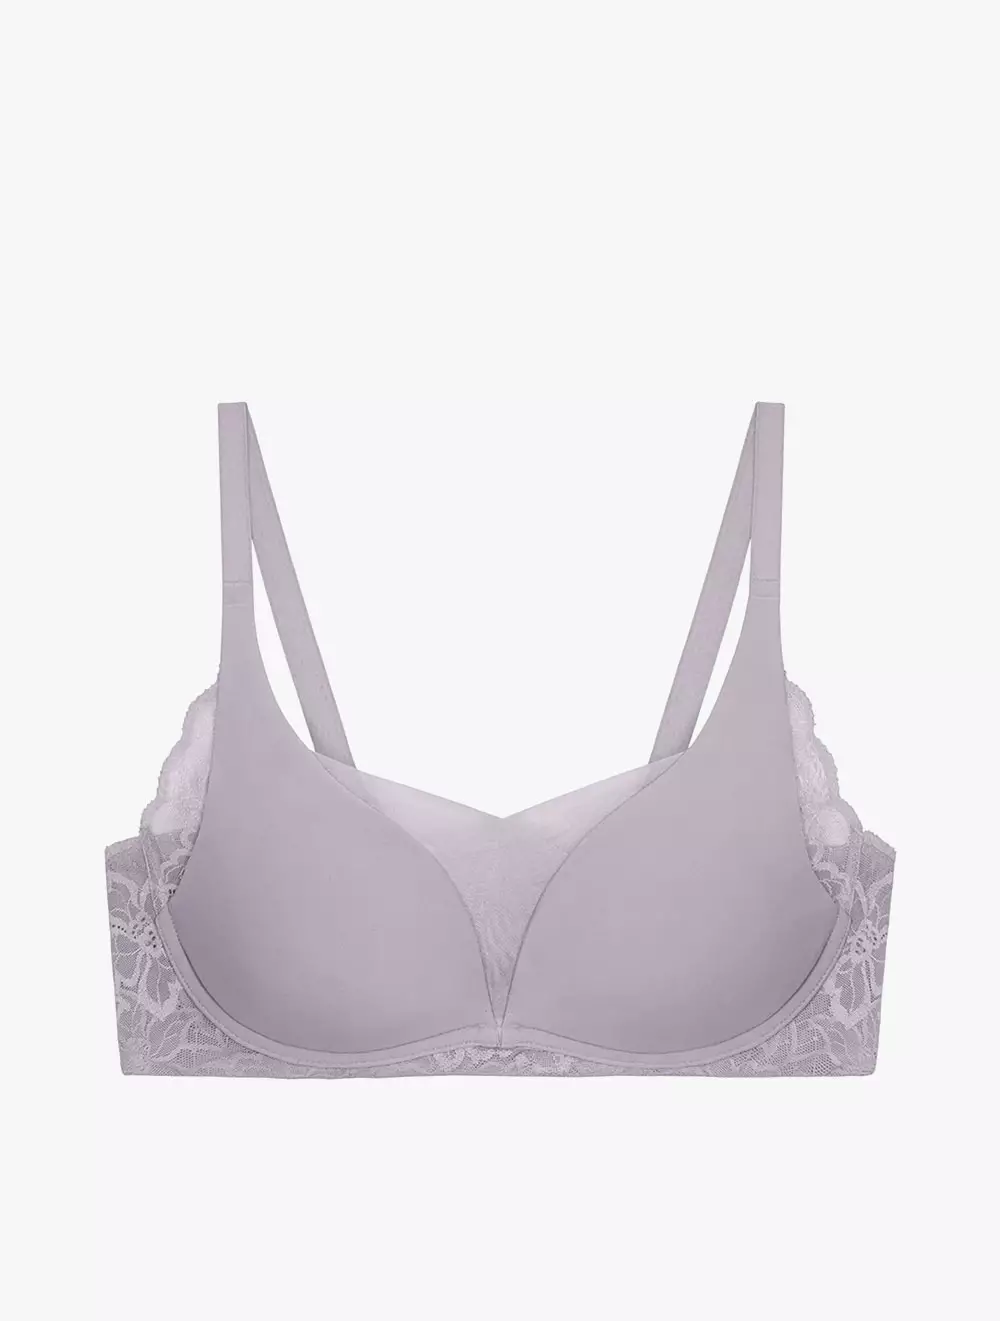 Wired Bras, Triumph, Simply Style Larkspur Wired Padded Half Cup Bra